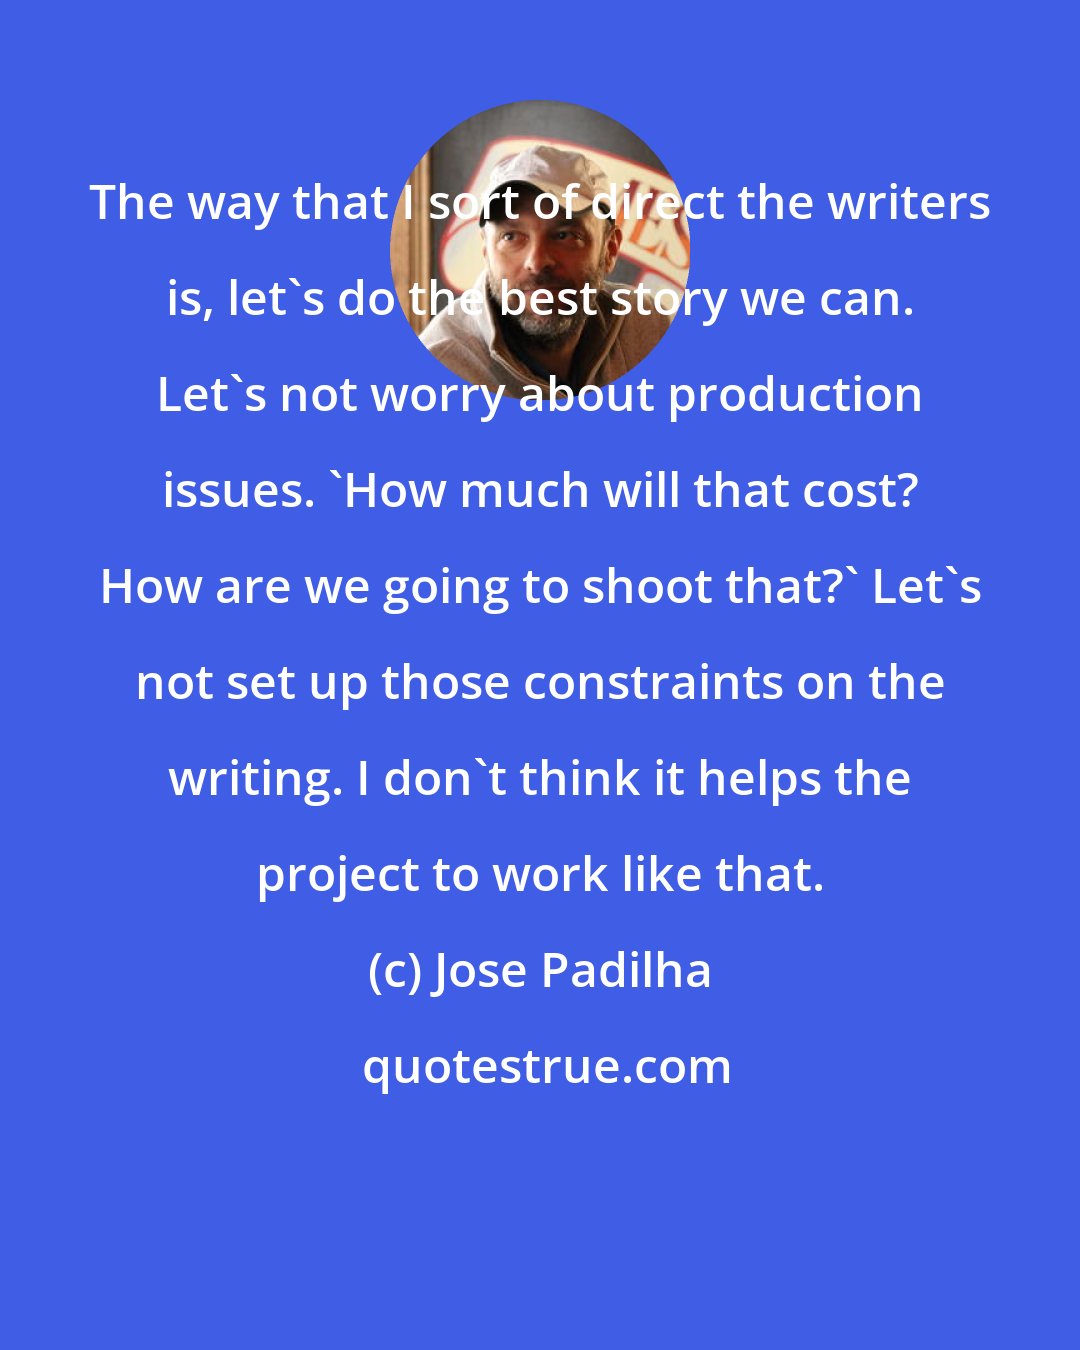 Jose Padilha: The way that I sort of direct the writers is, let's do the best story we can. Let's not worry about production issues. 'How much will that cost? How are we going to shoot that?' Let's not set up those constraints on the writing. I don't think it helps the project to work like that.